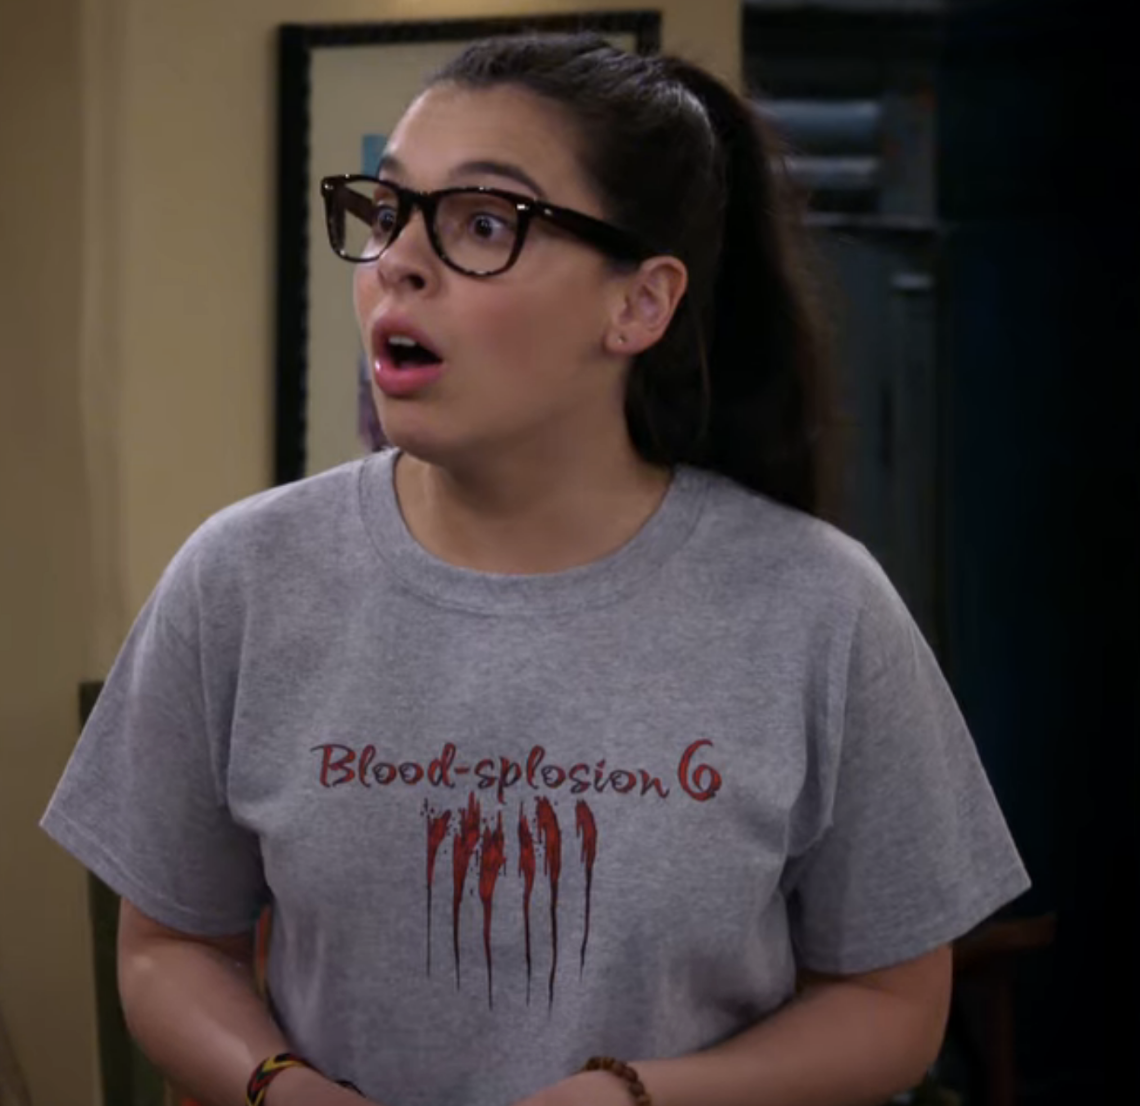 Woman in glasses and a T-shirt with &quot;Blood-splosion 6&quot; text and graphic. She looks surprised